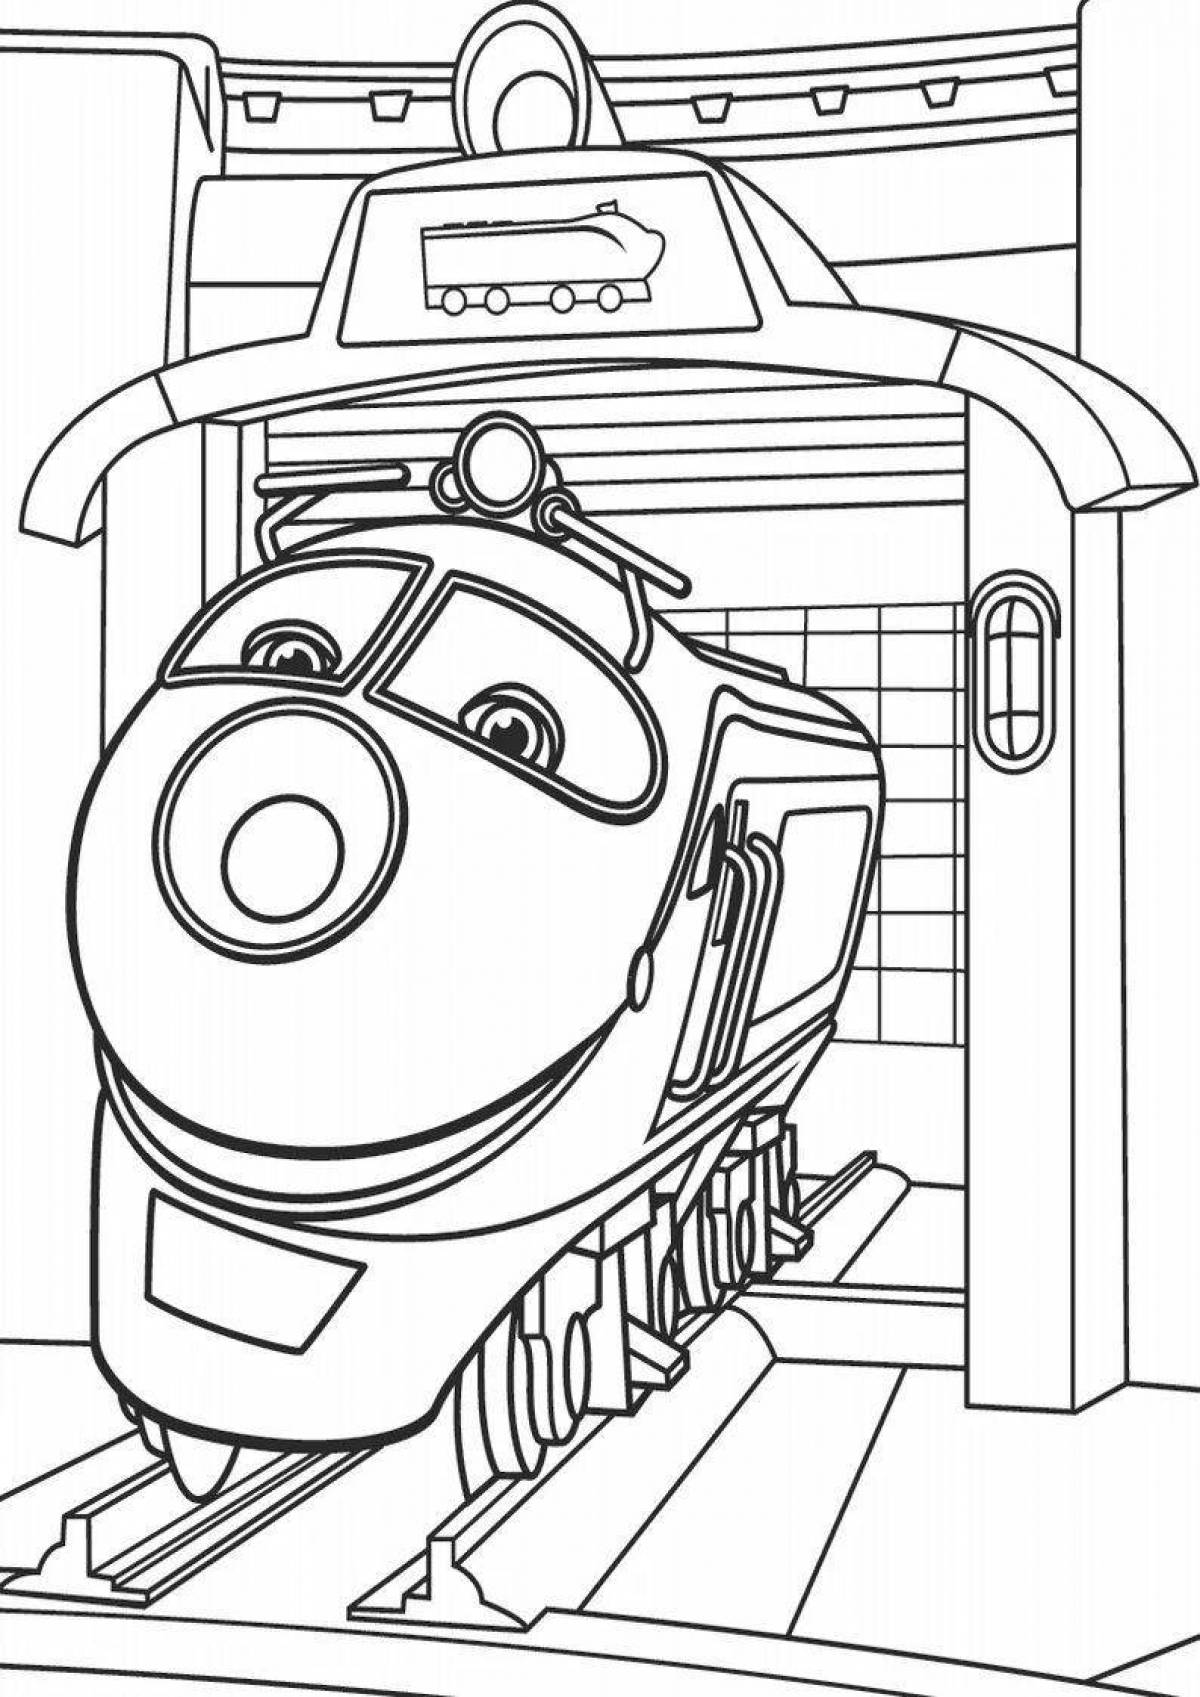 Playful maxi robot train coloring page